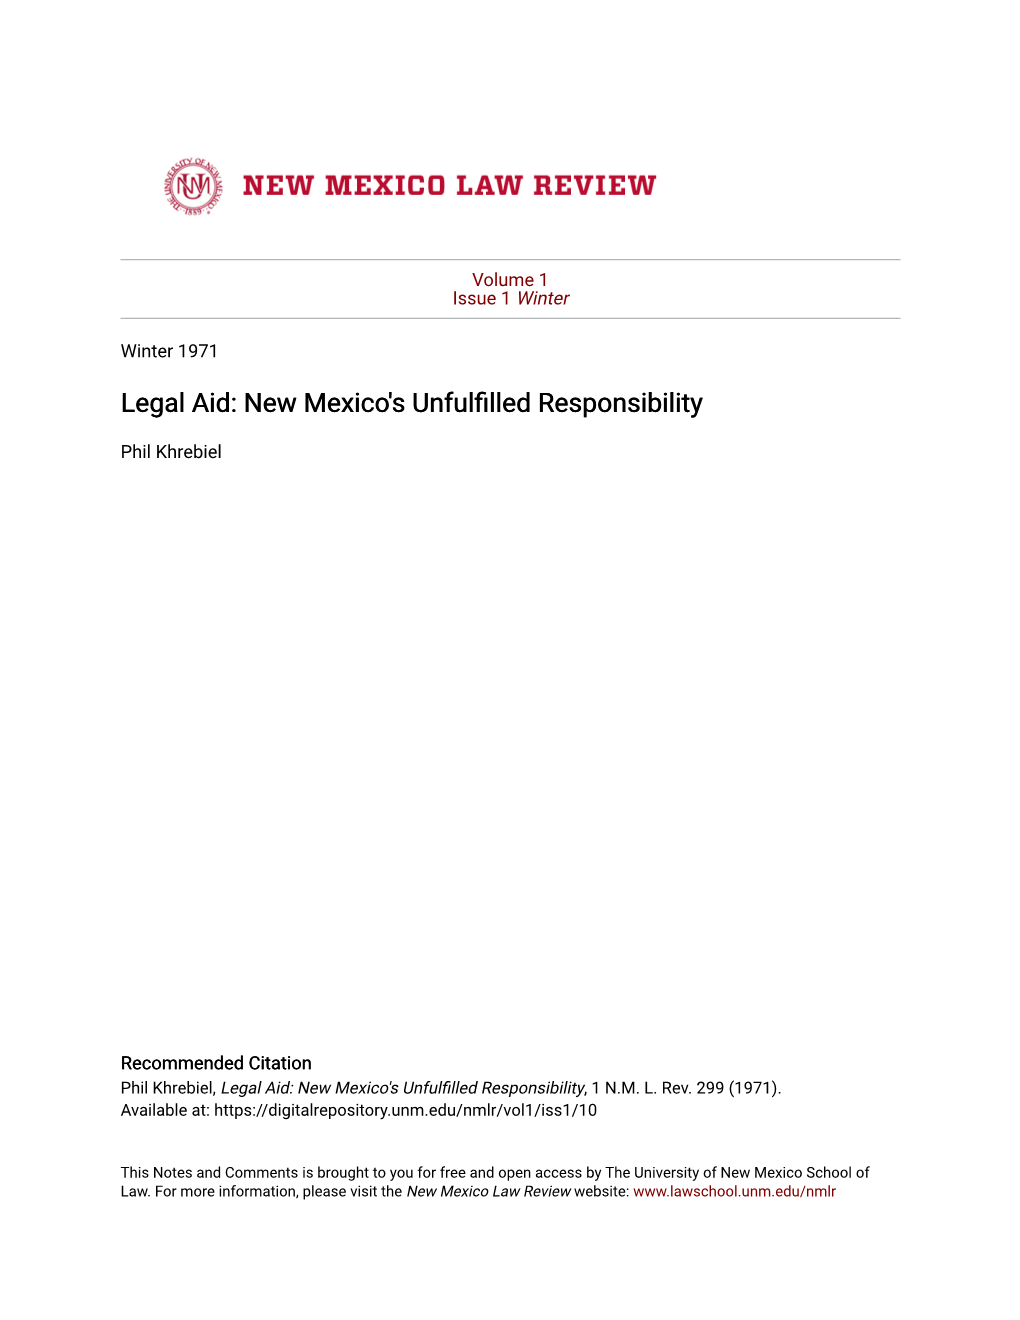 Legal Aid: New Mexico's Unfulfilled Responsibility